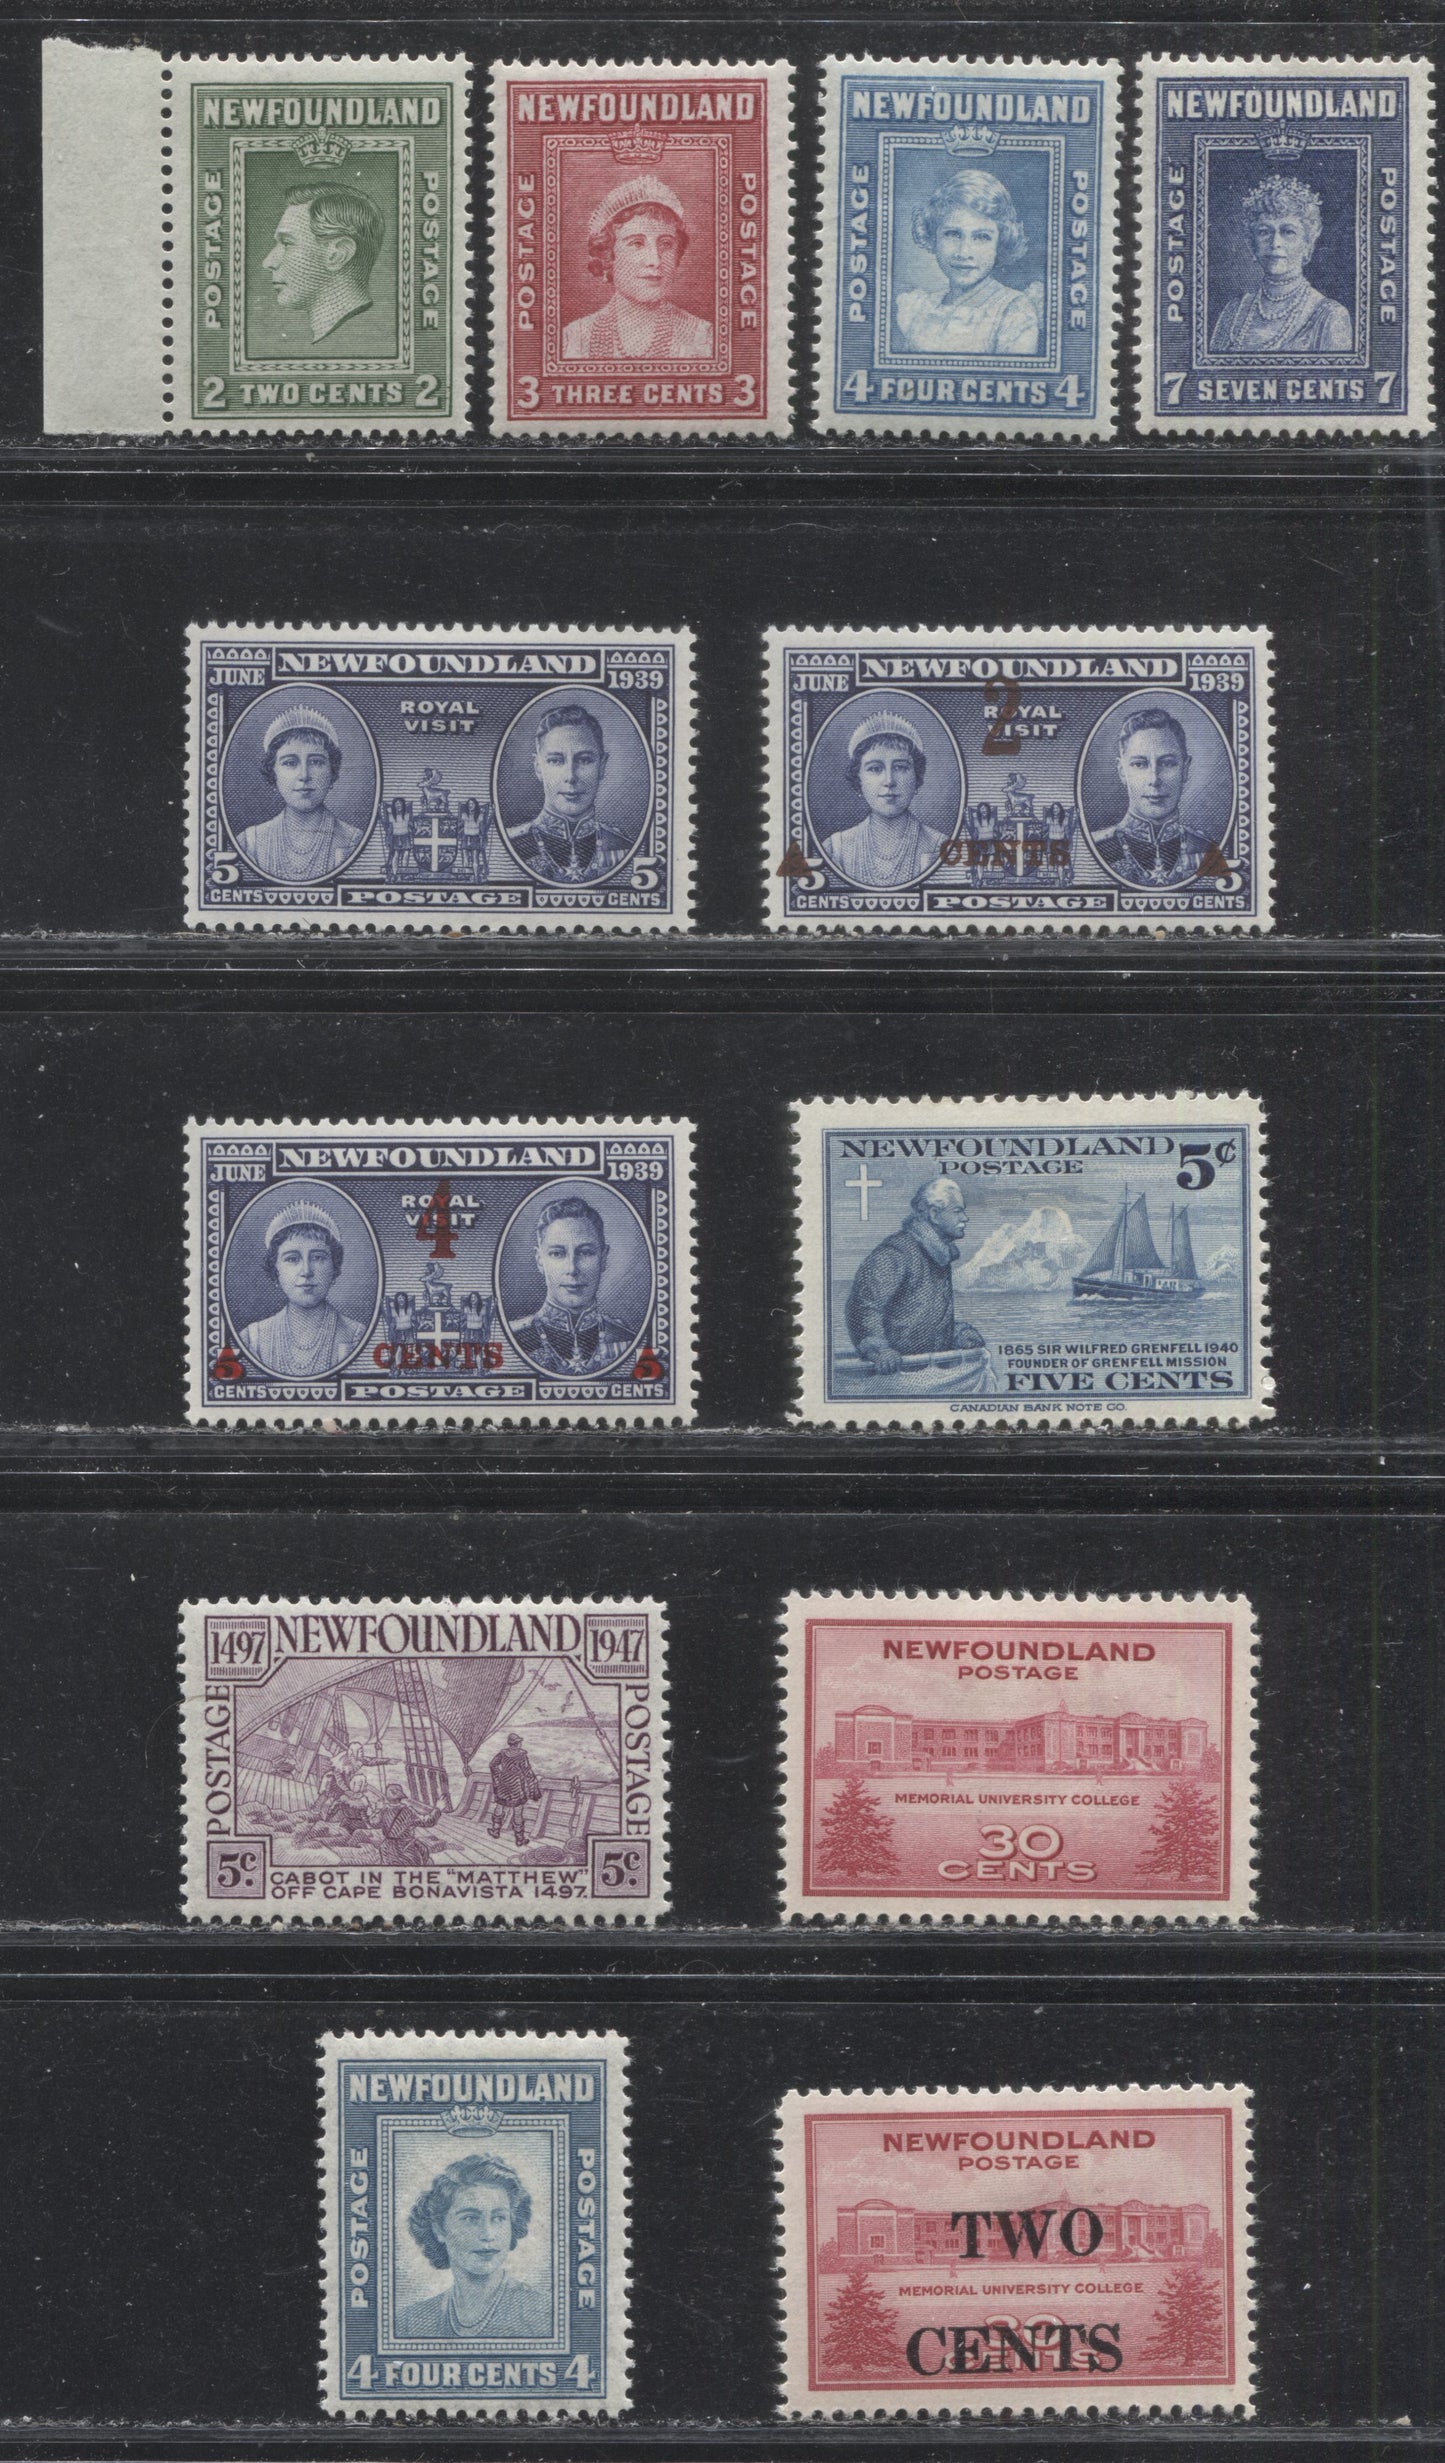 Lot 136 Newfoundland # 245-252, 267-270 2c - 30c Green - Carmine Rose King George VI - Cabot on the Matthew, 1938 Royal Family - 1949 Cabot Issue, Seven VFOG Complete Sets